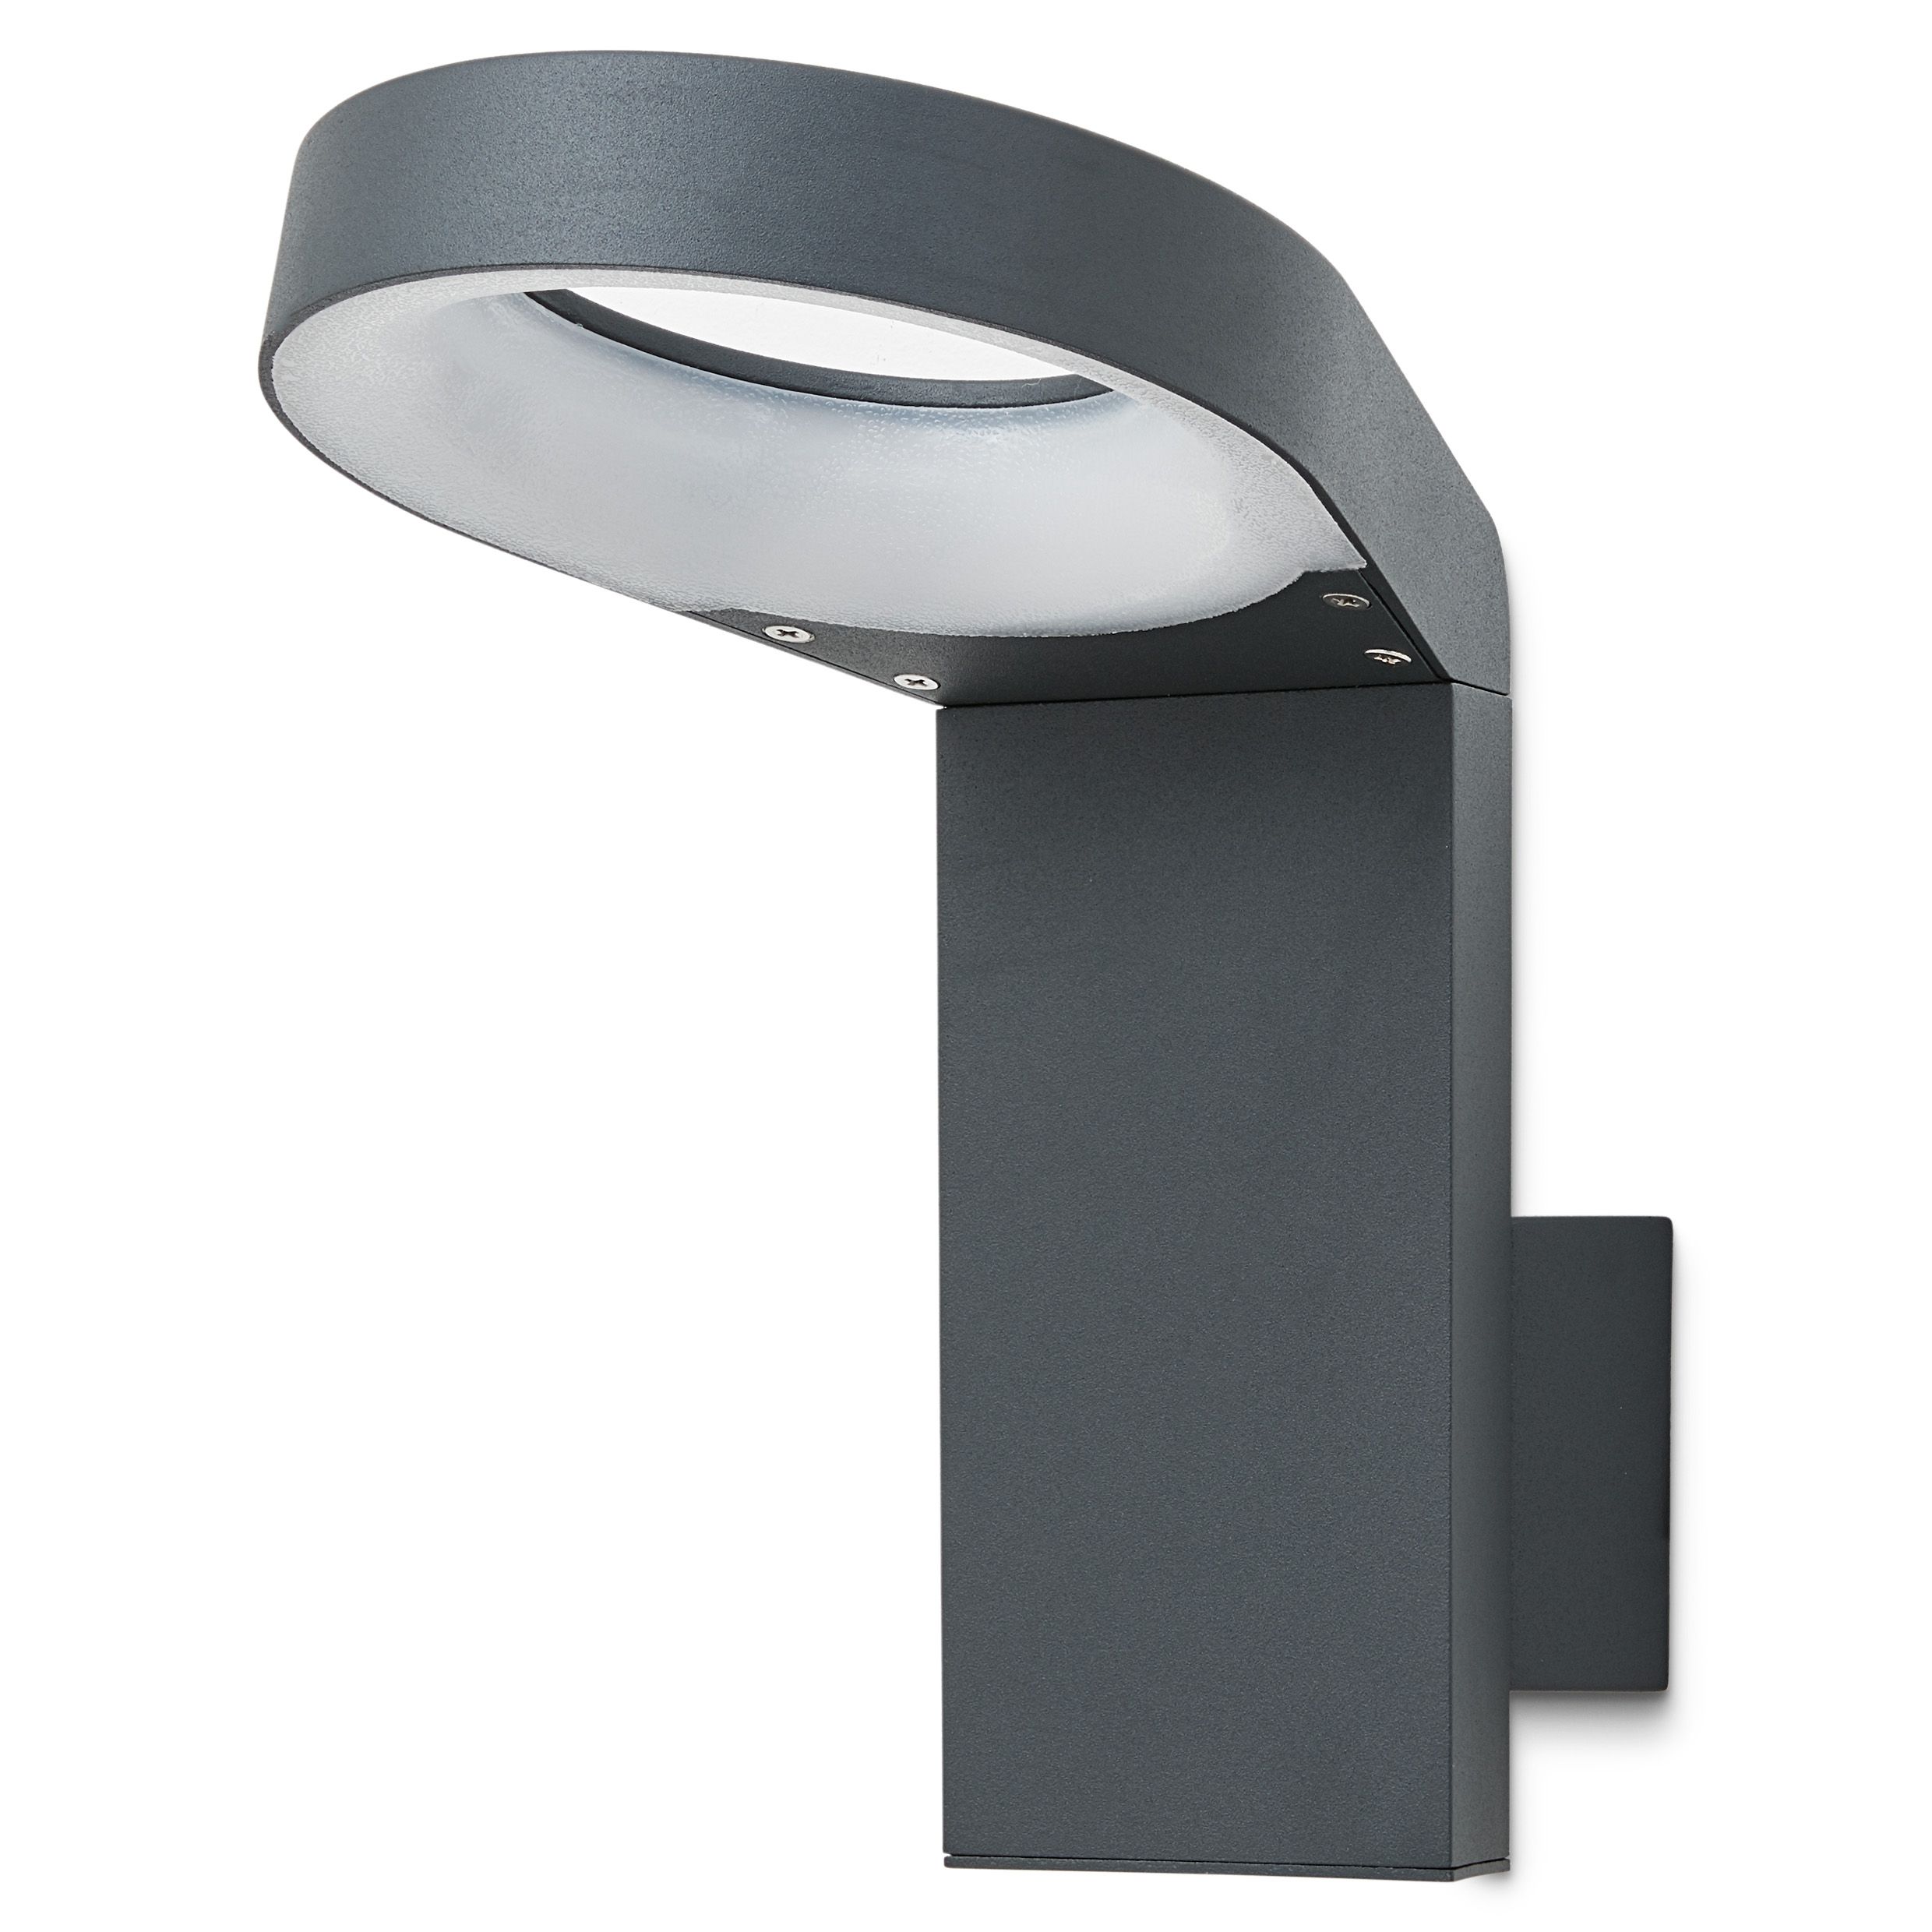 Blooma Delson LED Outdoor Matt charcoal grey Wall light